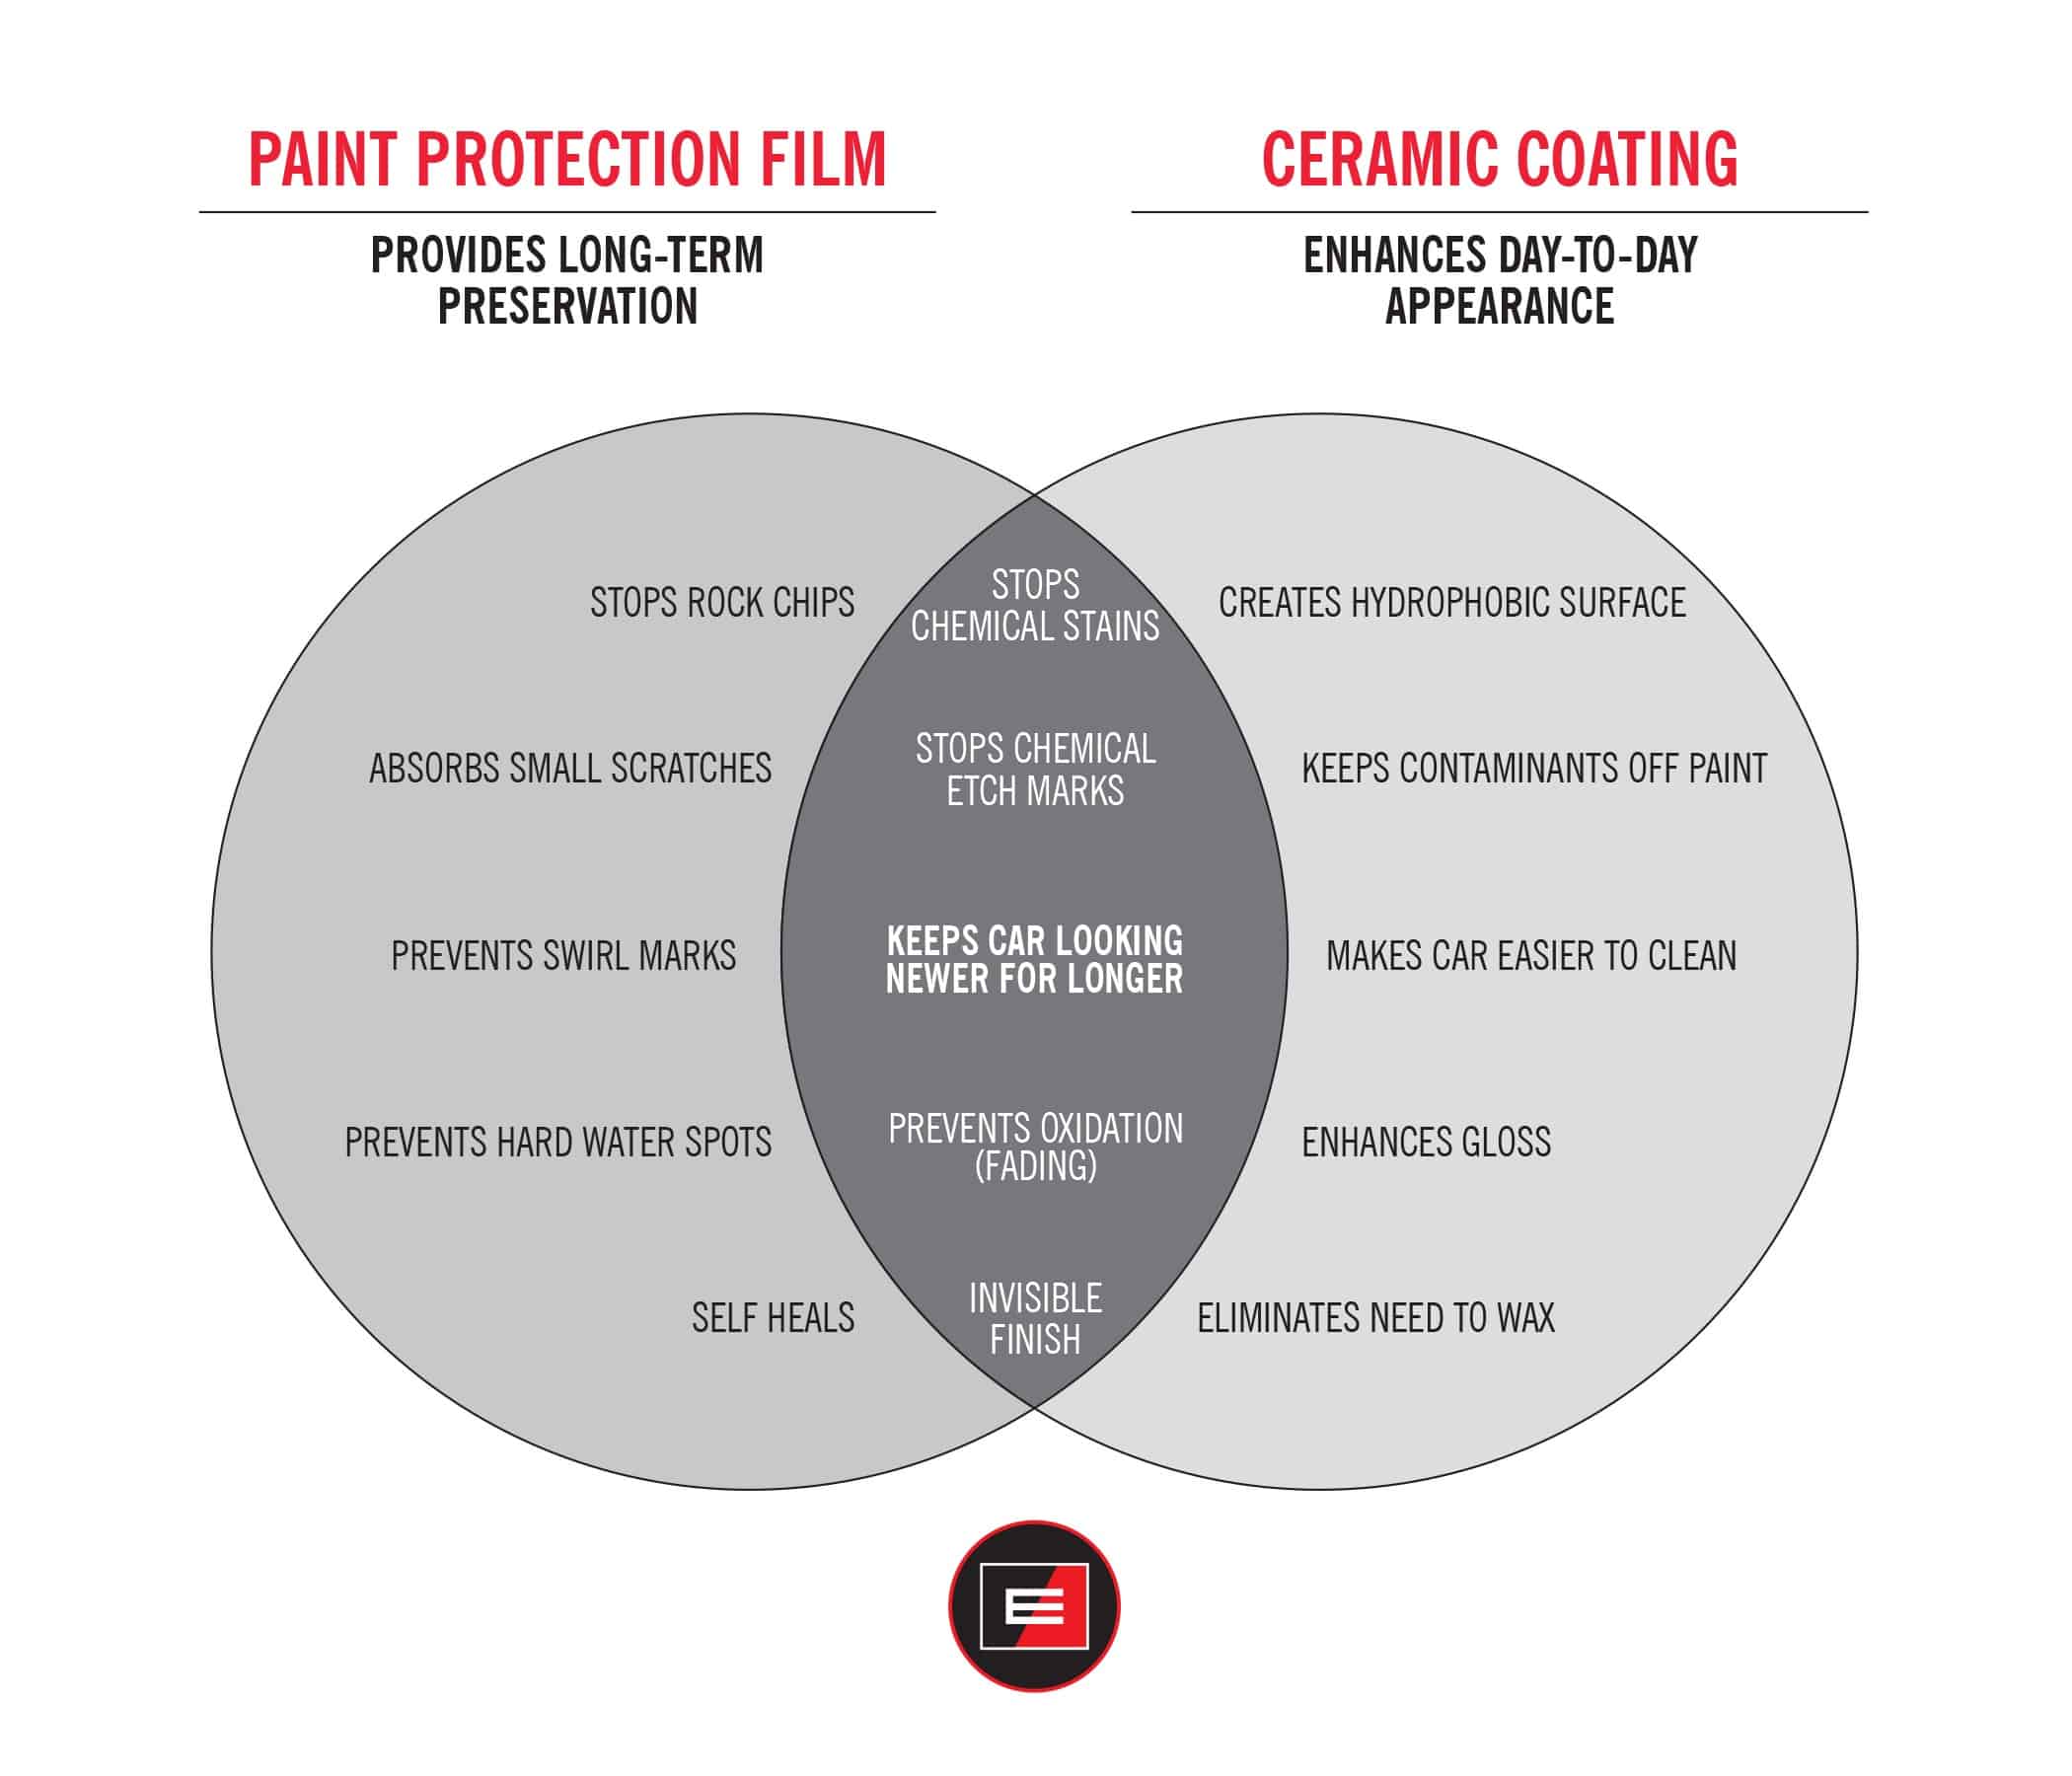 The Pros and Cons of Paint Protection Film- Infographic - Automotive  Appearance - Medium